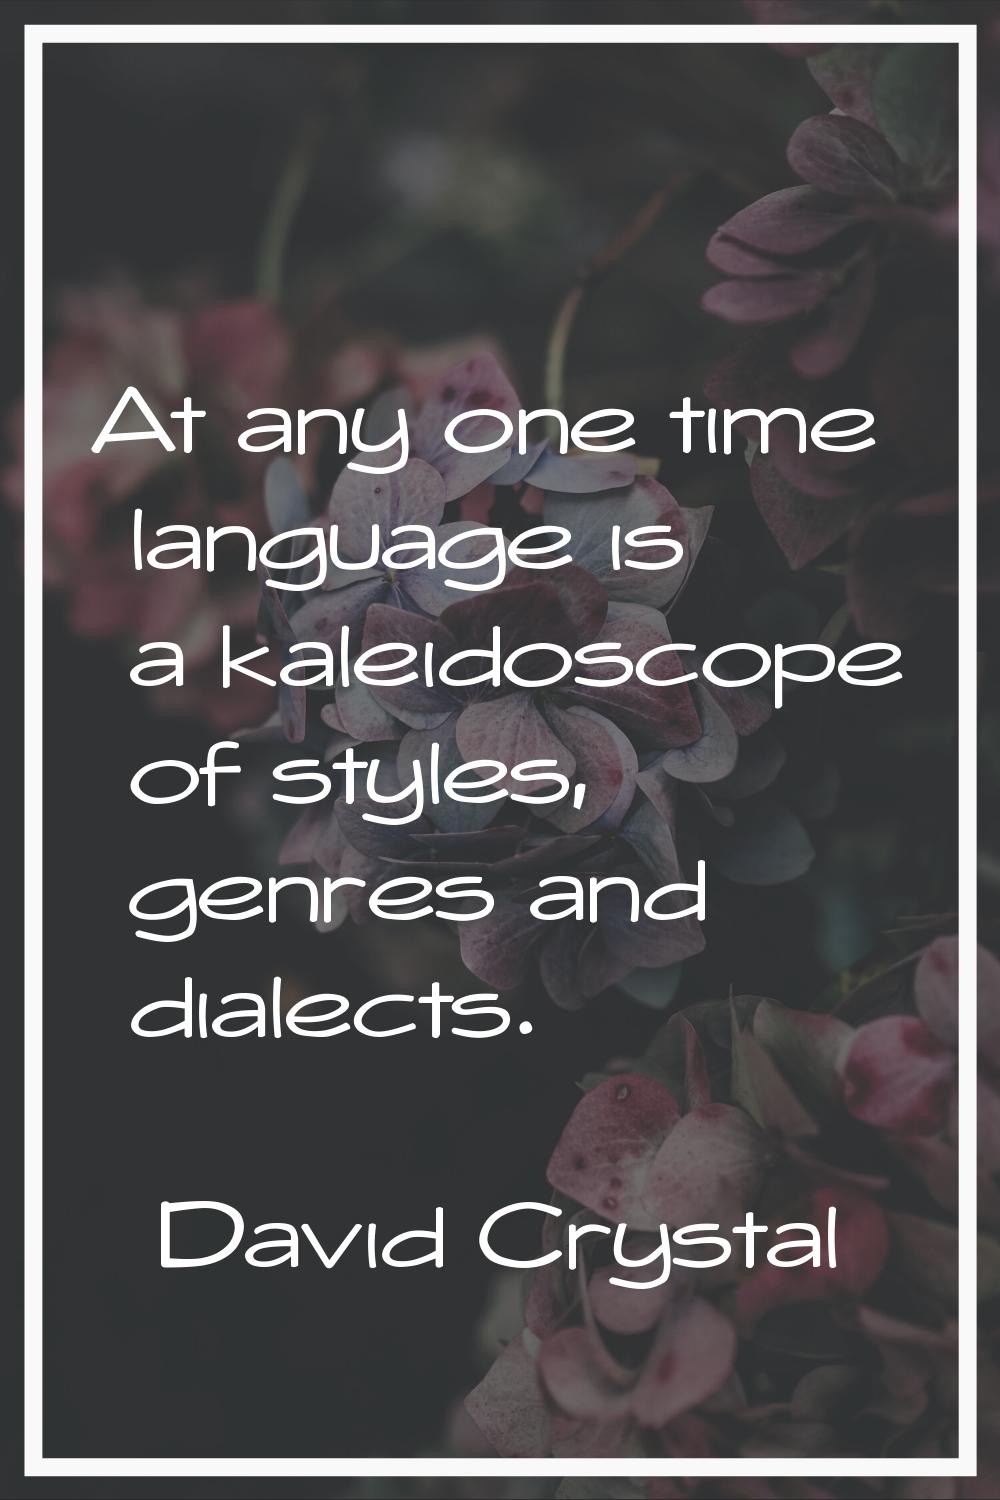 At any one time language is a kaleidoscope of styles, genres and dialects.